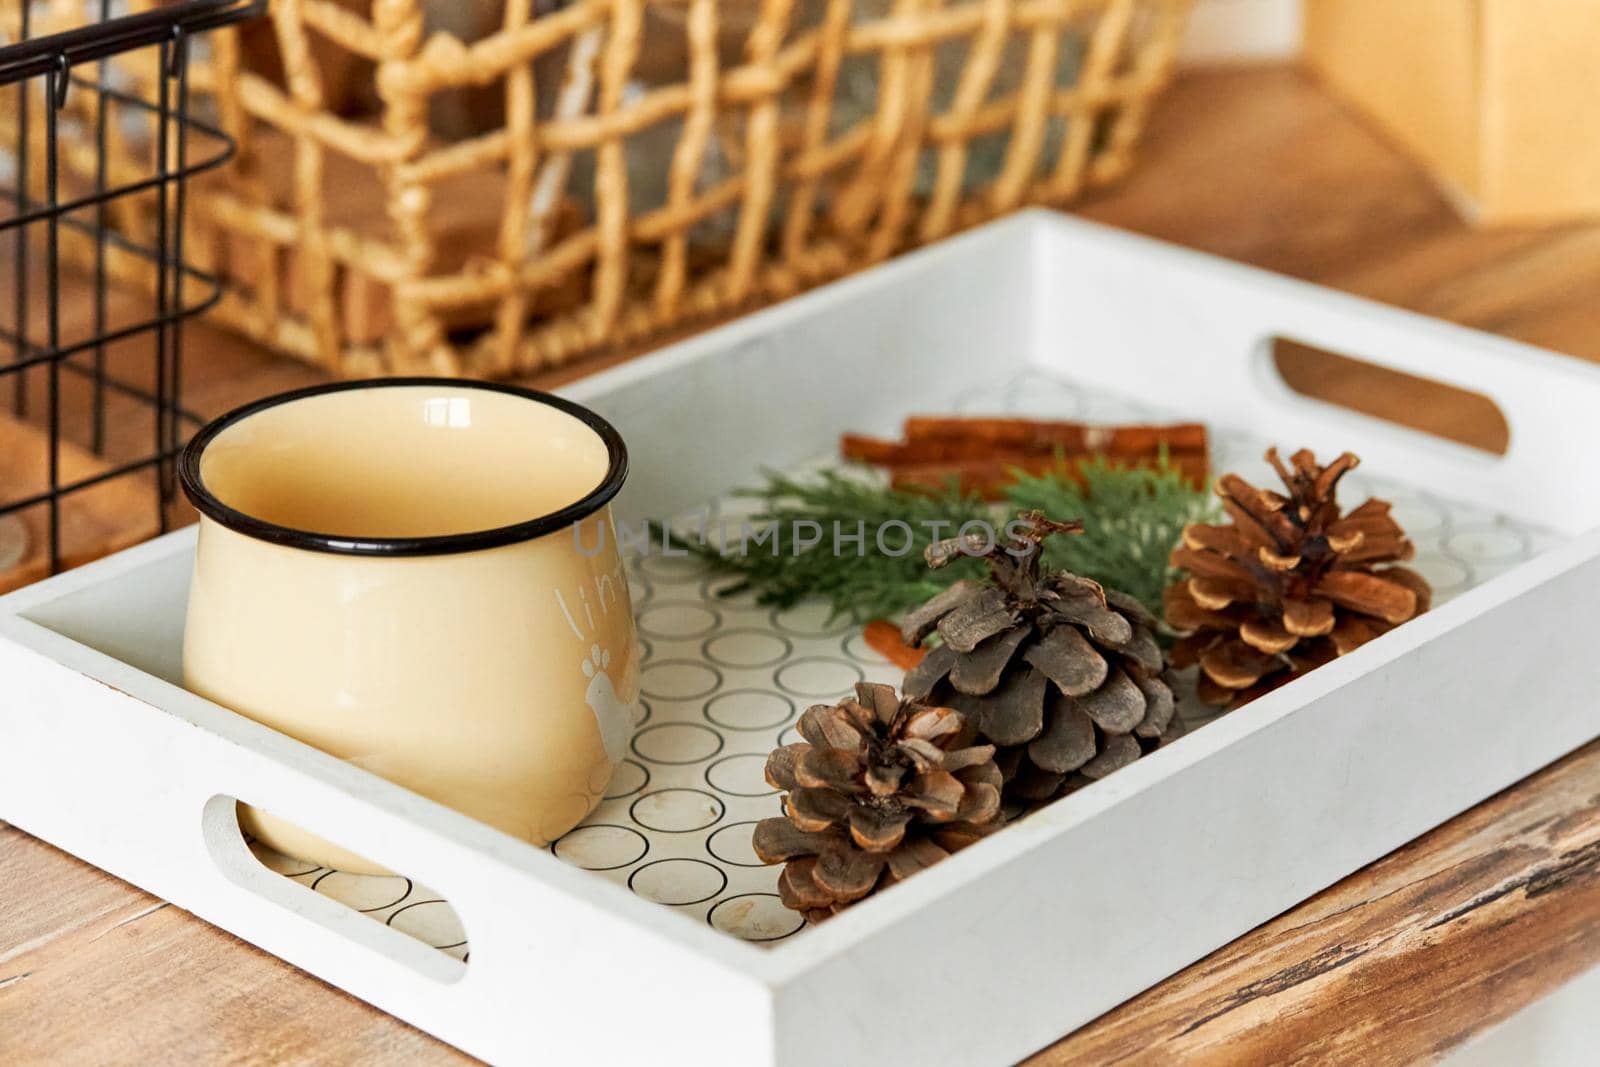 A tray with a jug of hot tea and pine cones. It will keep warm in cold autumn.